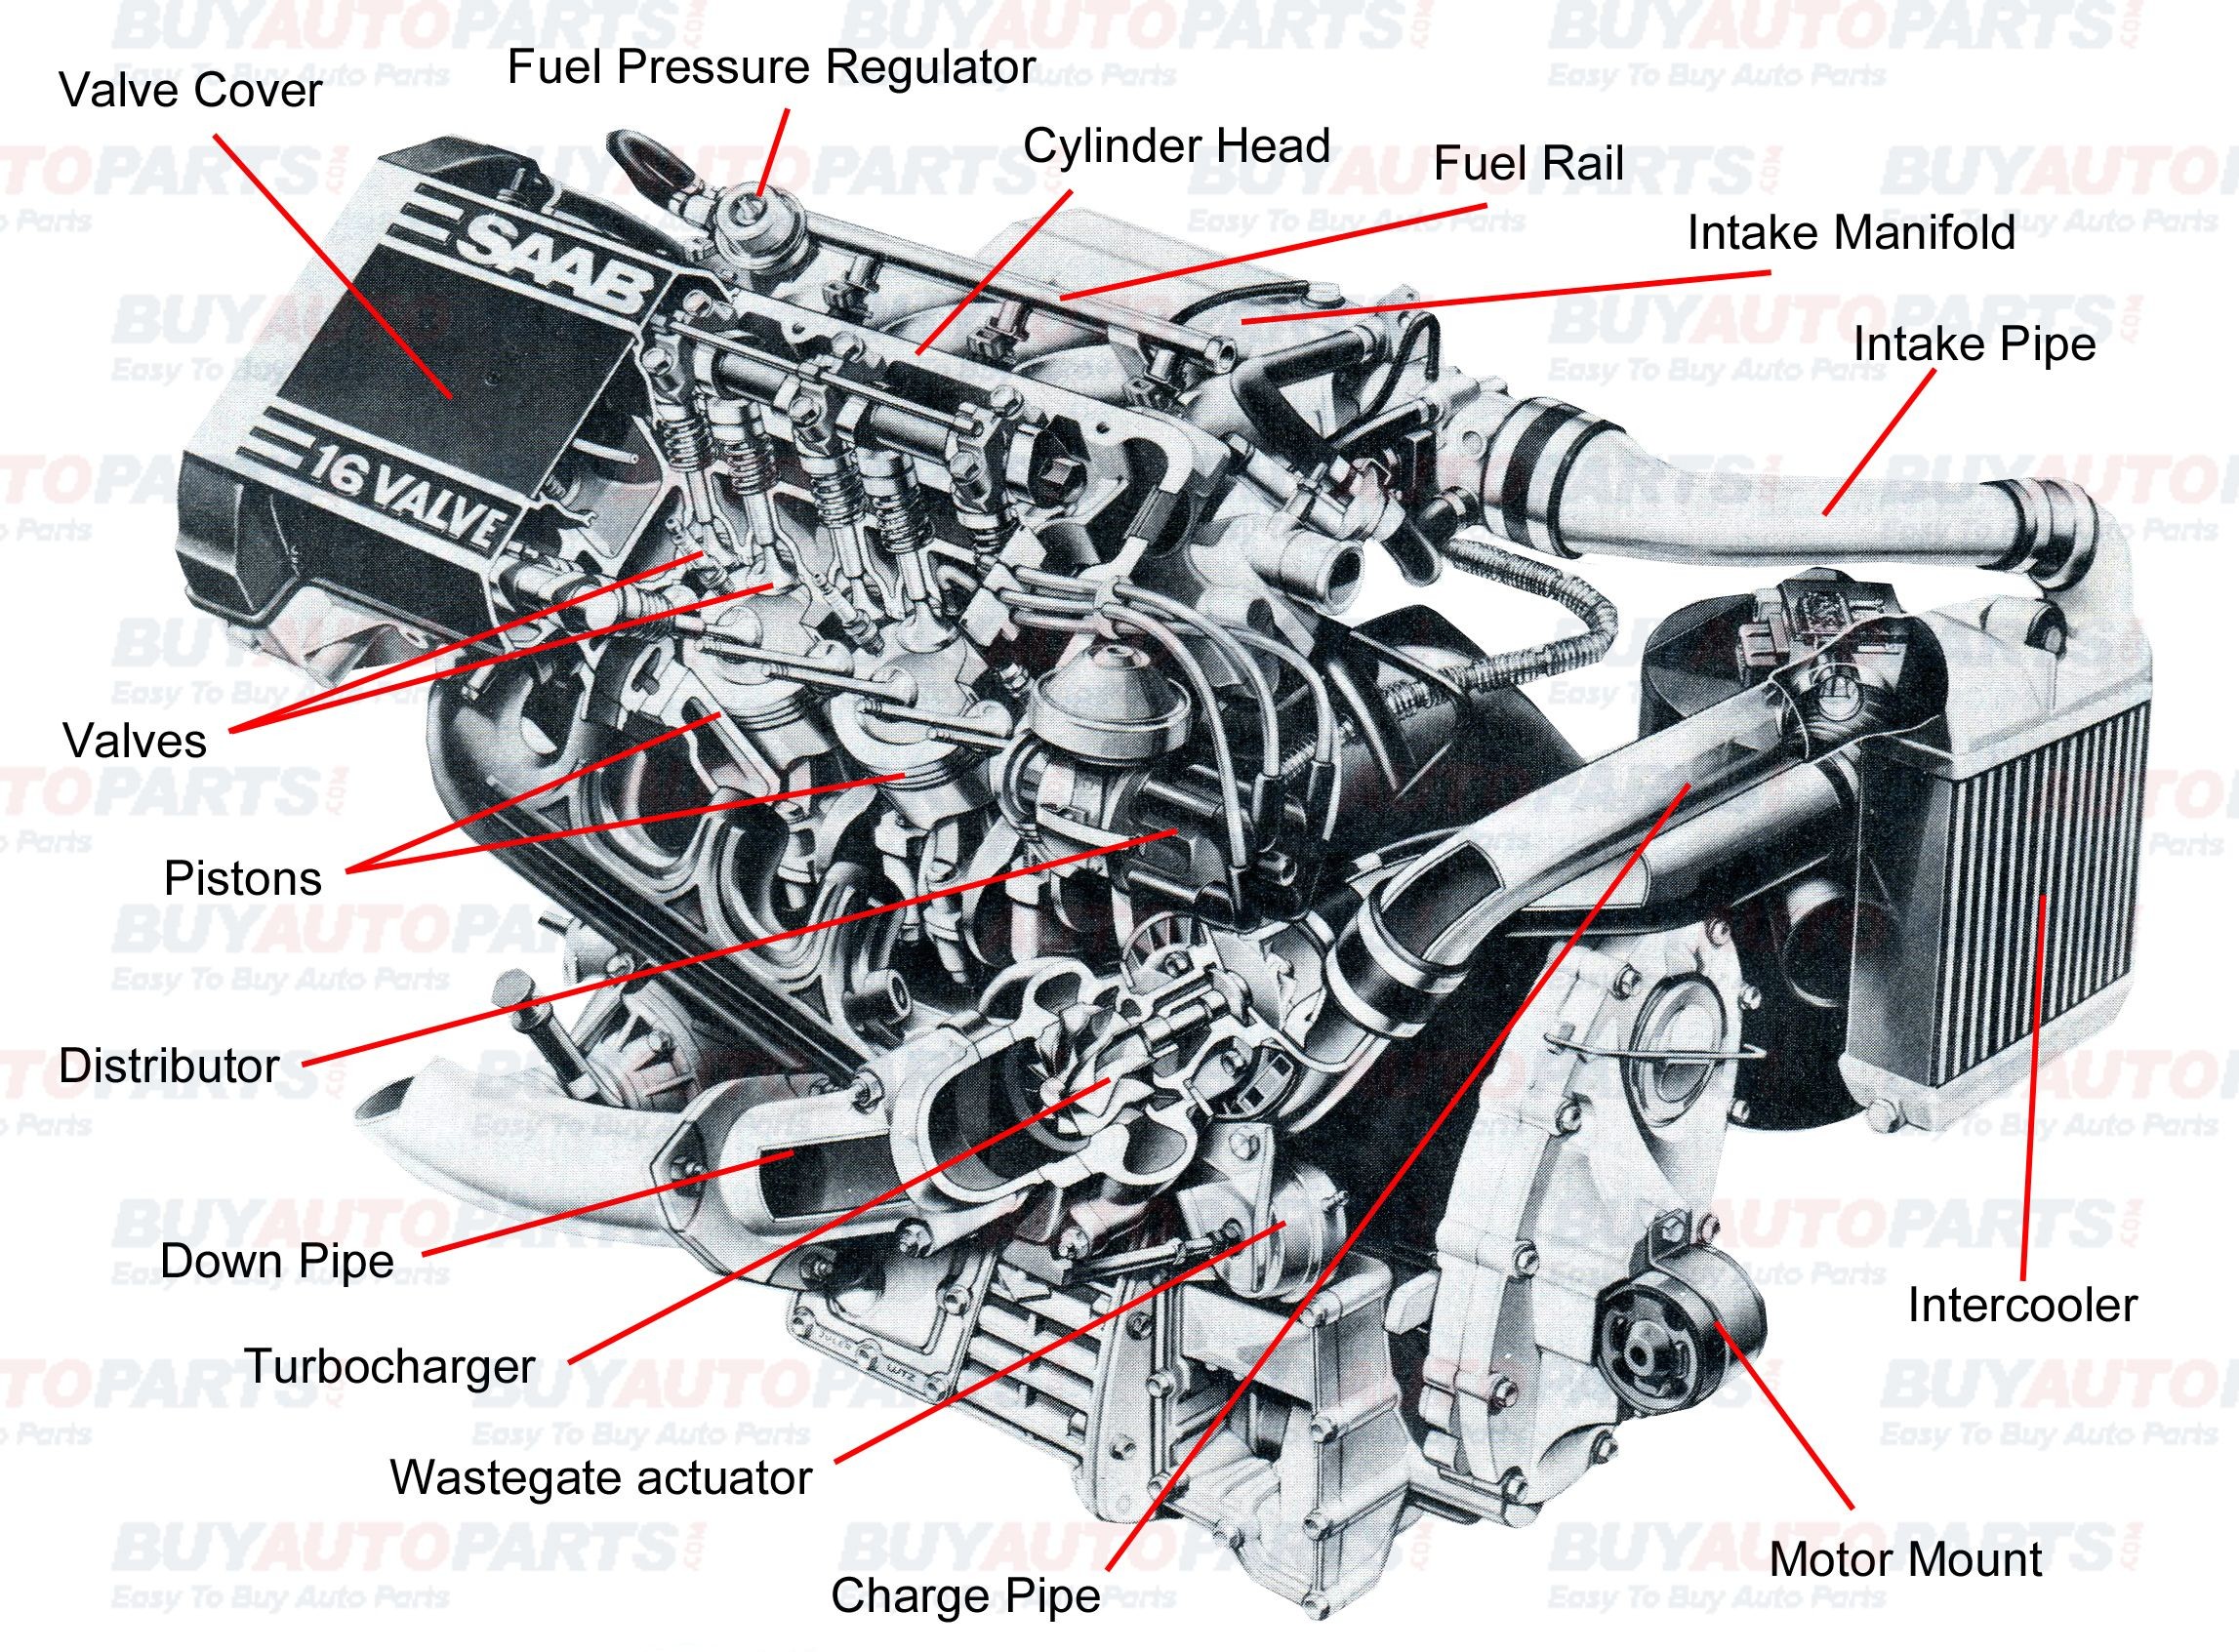 Mini Moto Engine Diagram Pin by Jimmiejanet Testellamwfz On What Does An Engine with Turbo Of Mini Moto Engine Diagram